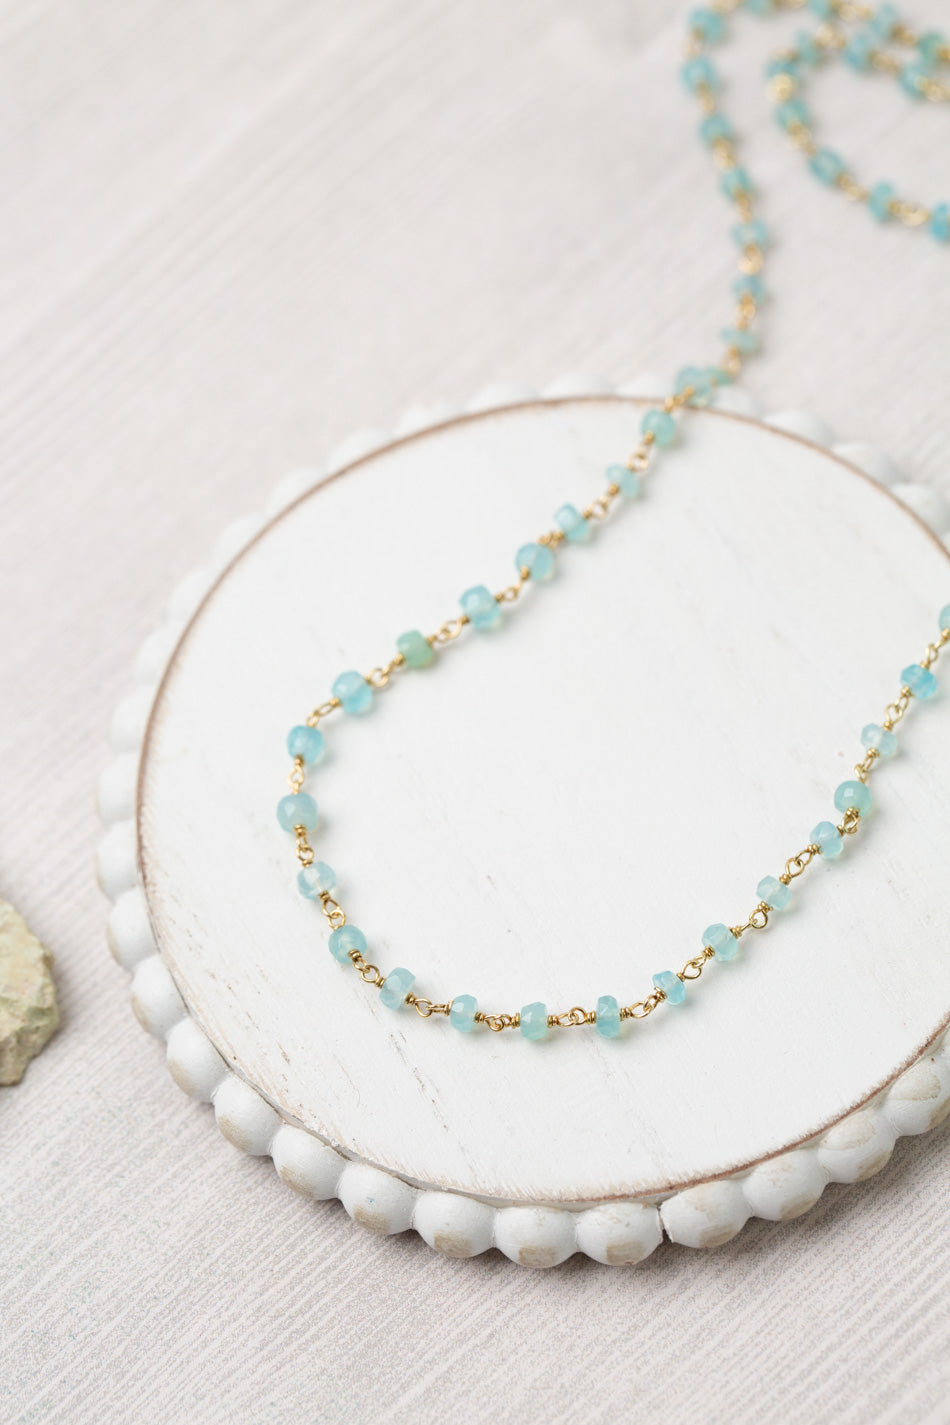 Limited Edition 21.5-23.5" Faceted Aqua Chalcedony Simple Necklace